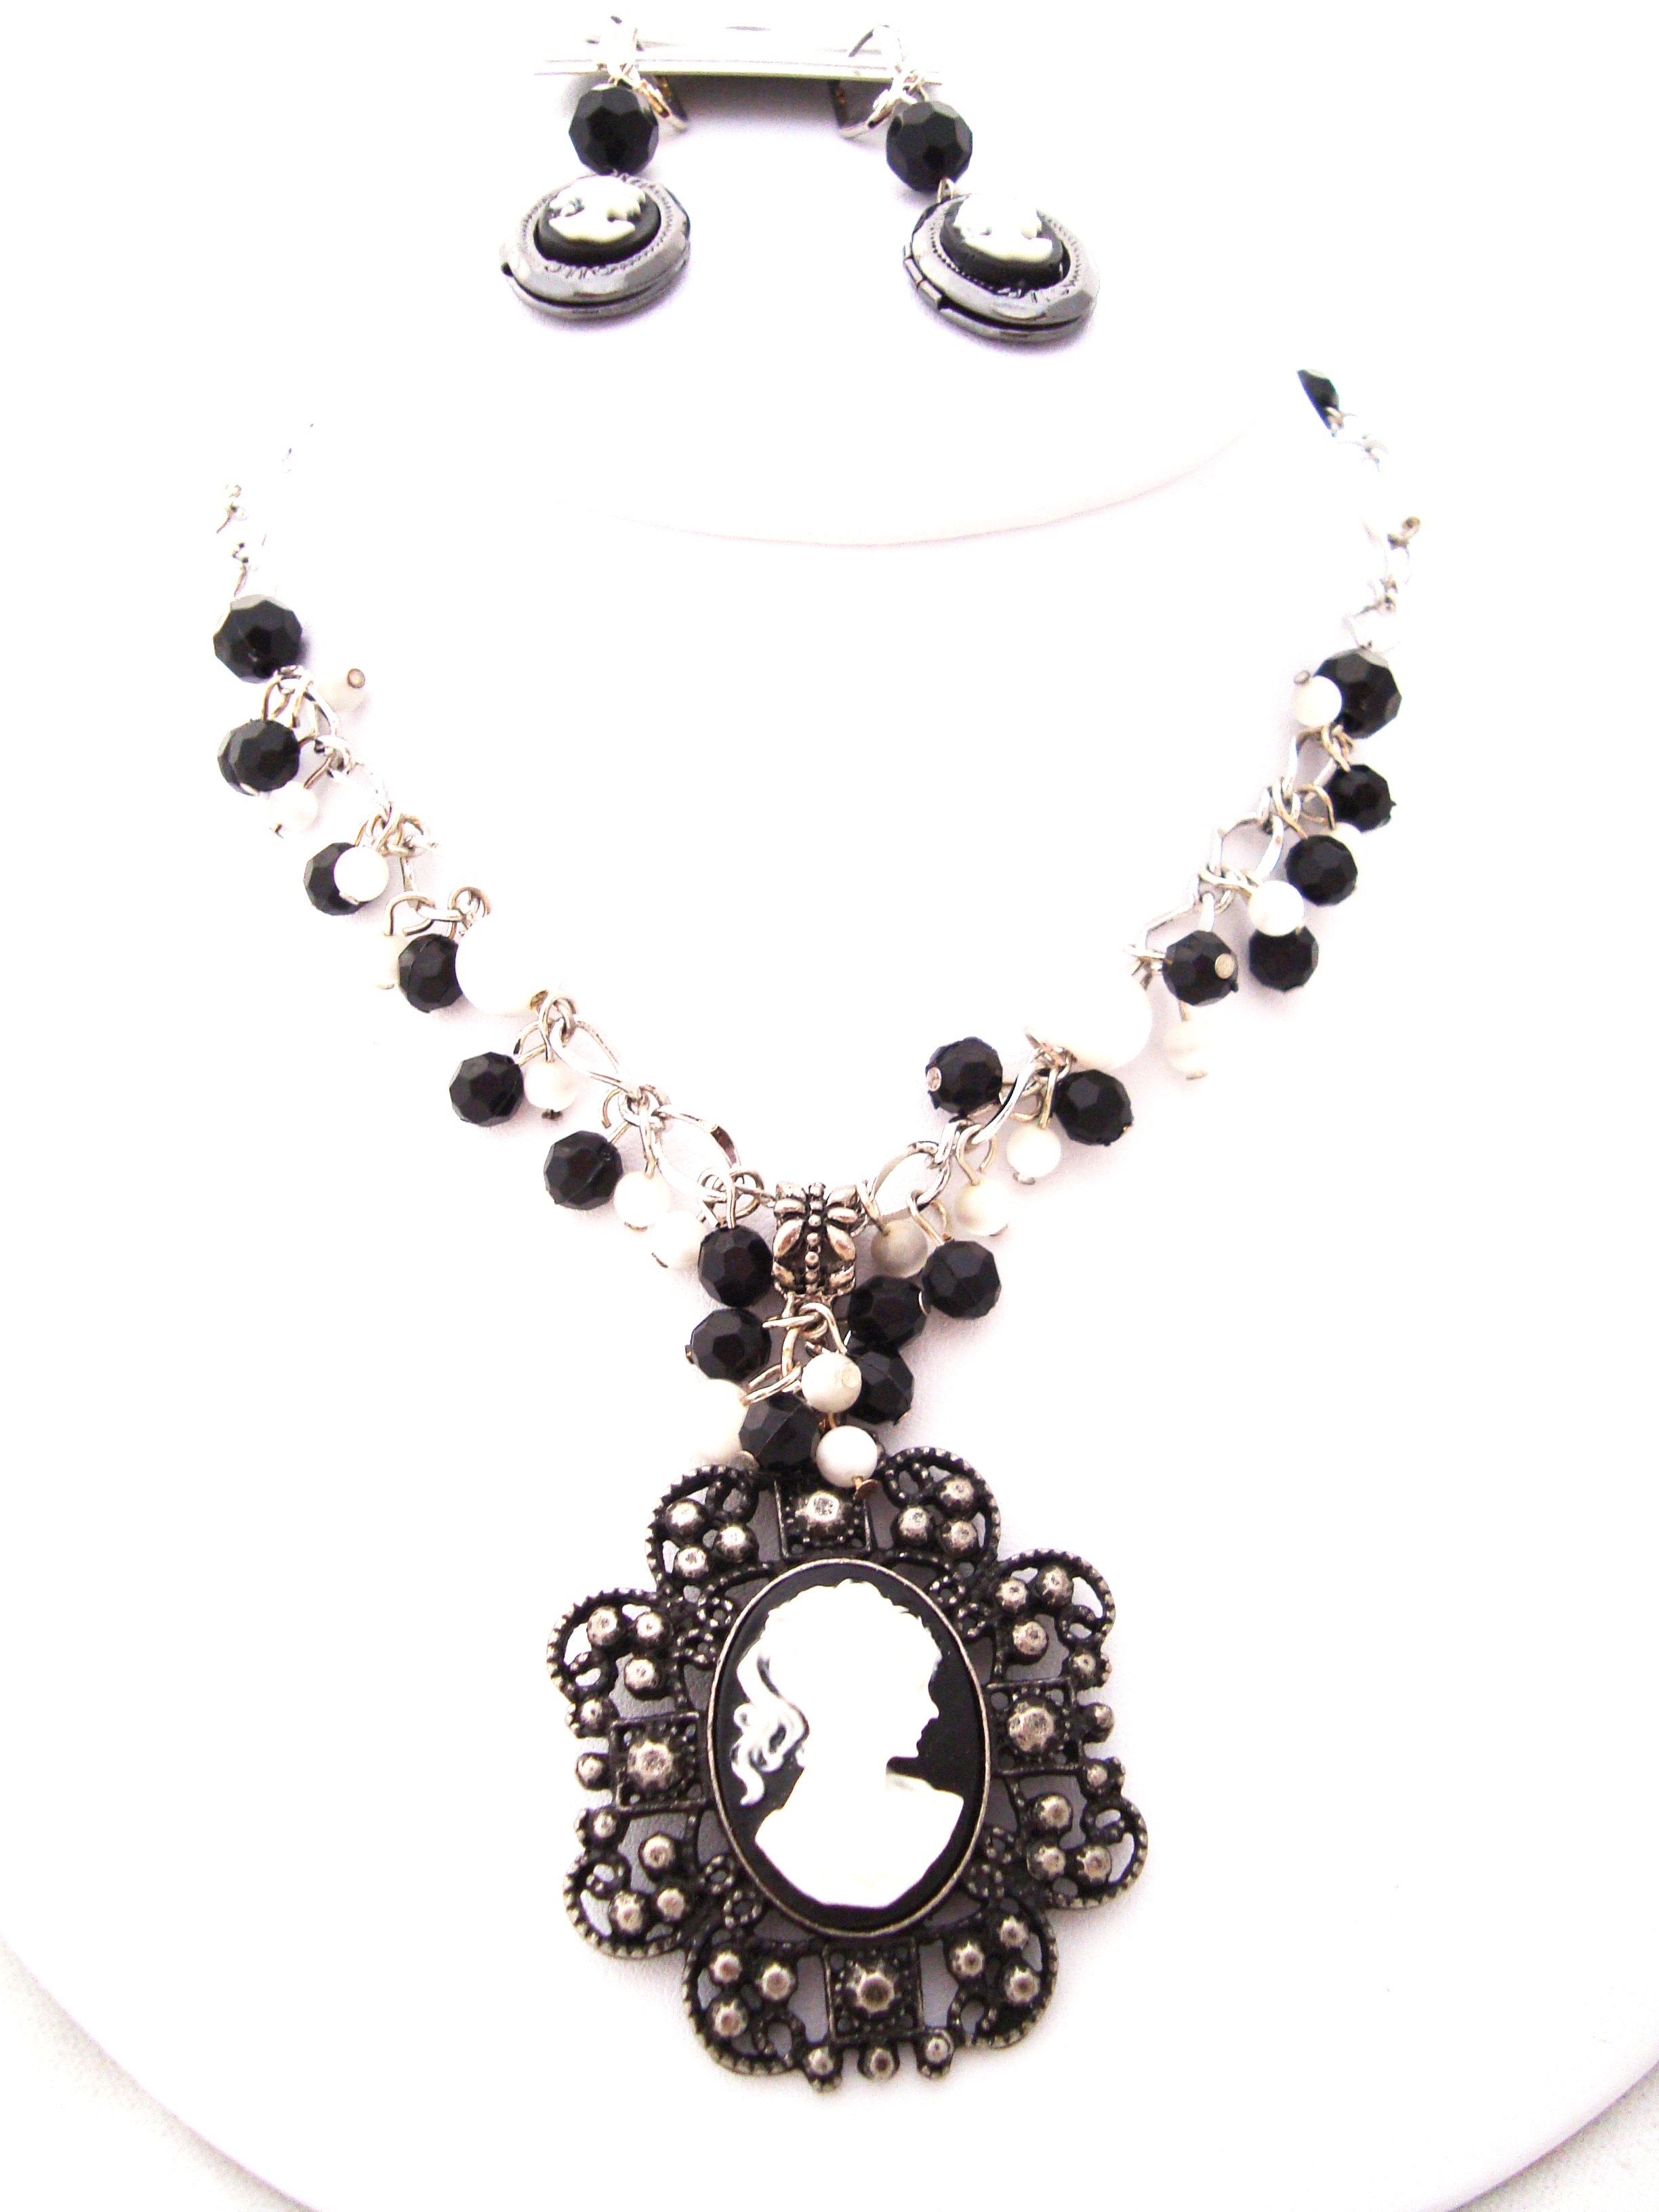 Black and White Right Facing Ponytail Girl Cameo Necklace Set